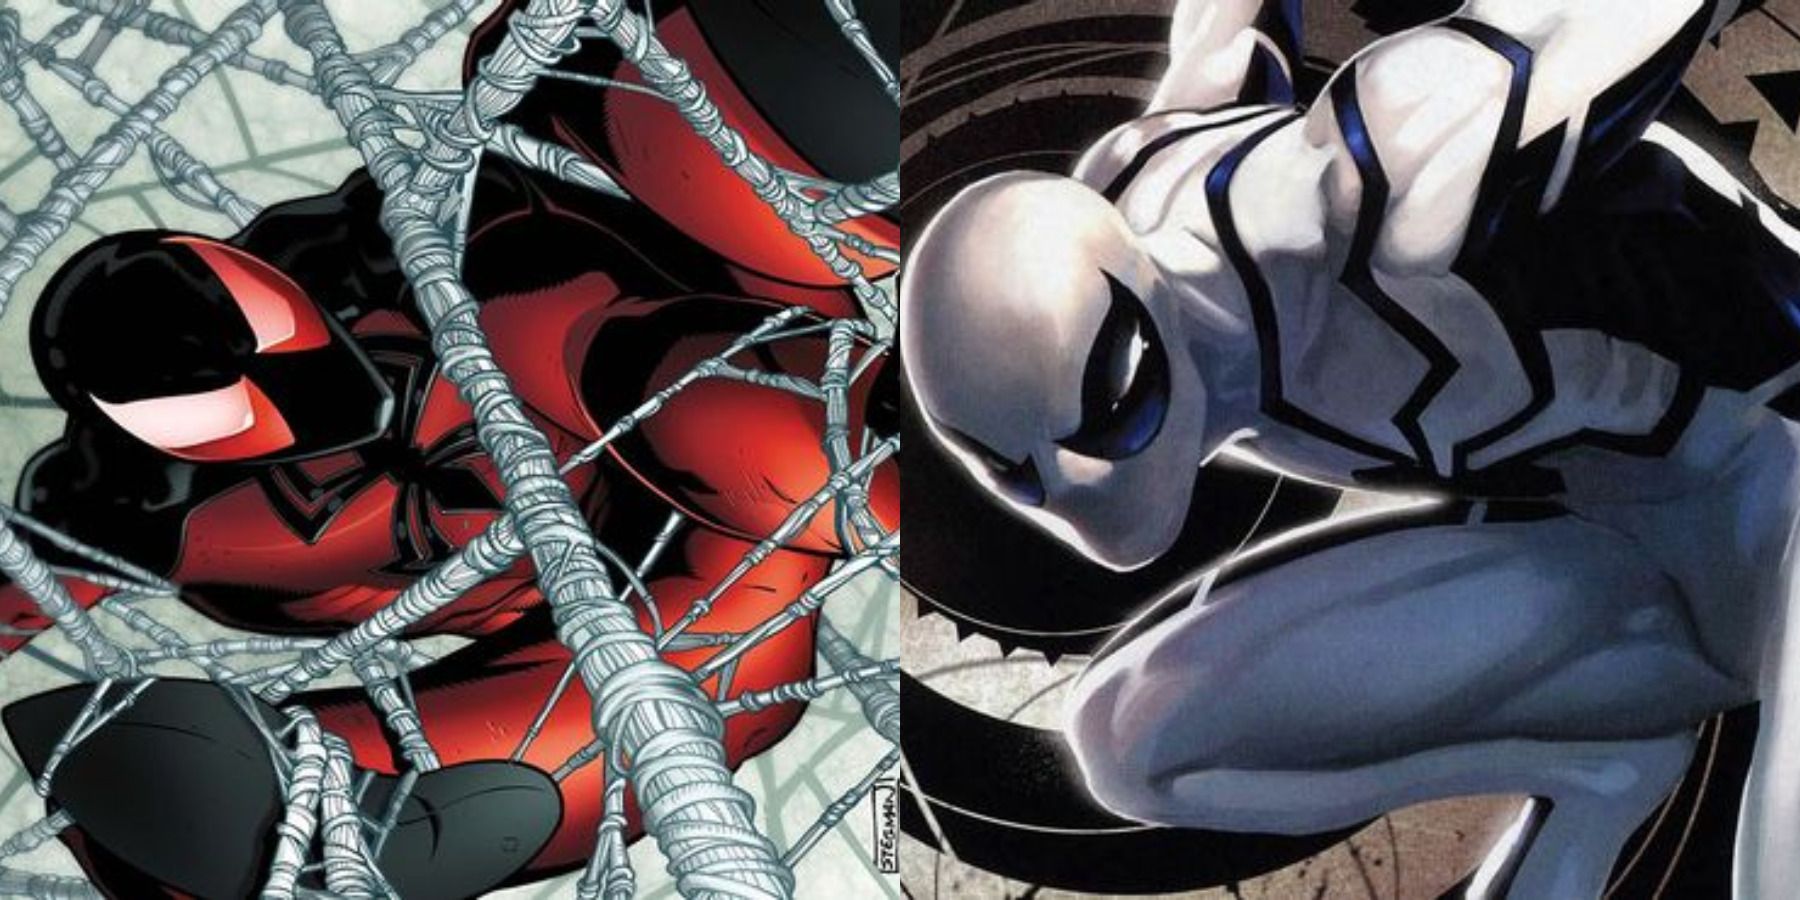 Spider-Man best non-movie suits feature split image Scarlet Spider (Kaine) and Future Foundation suit